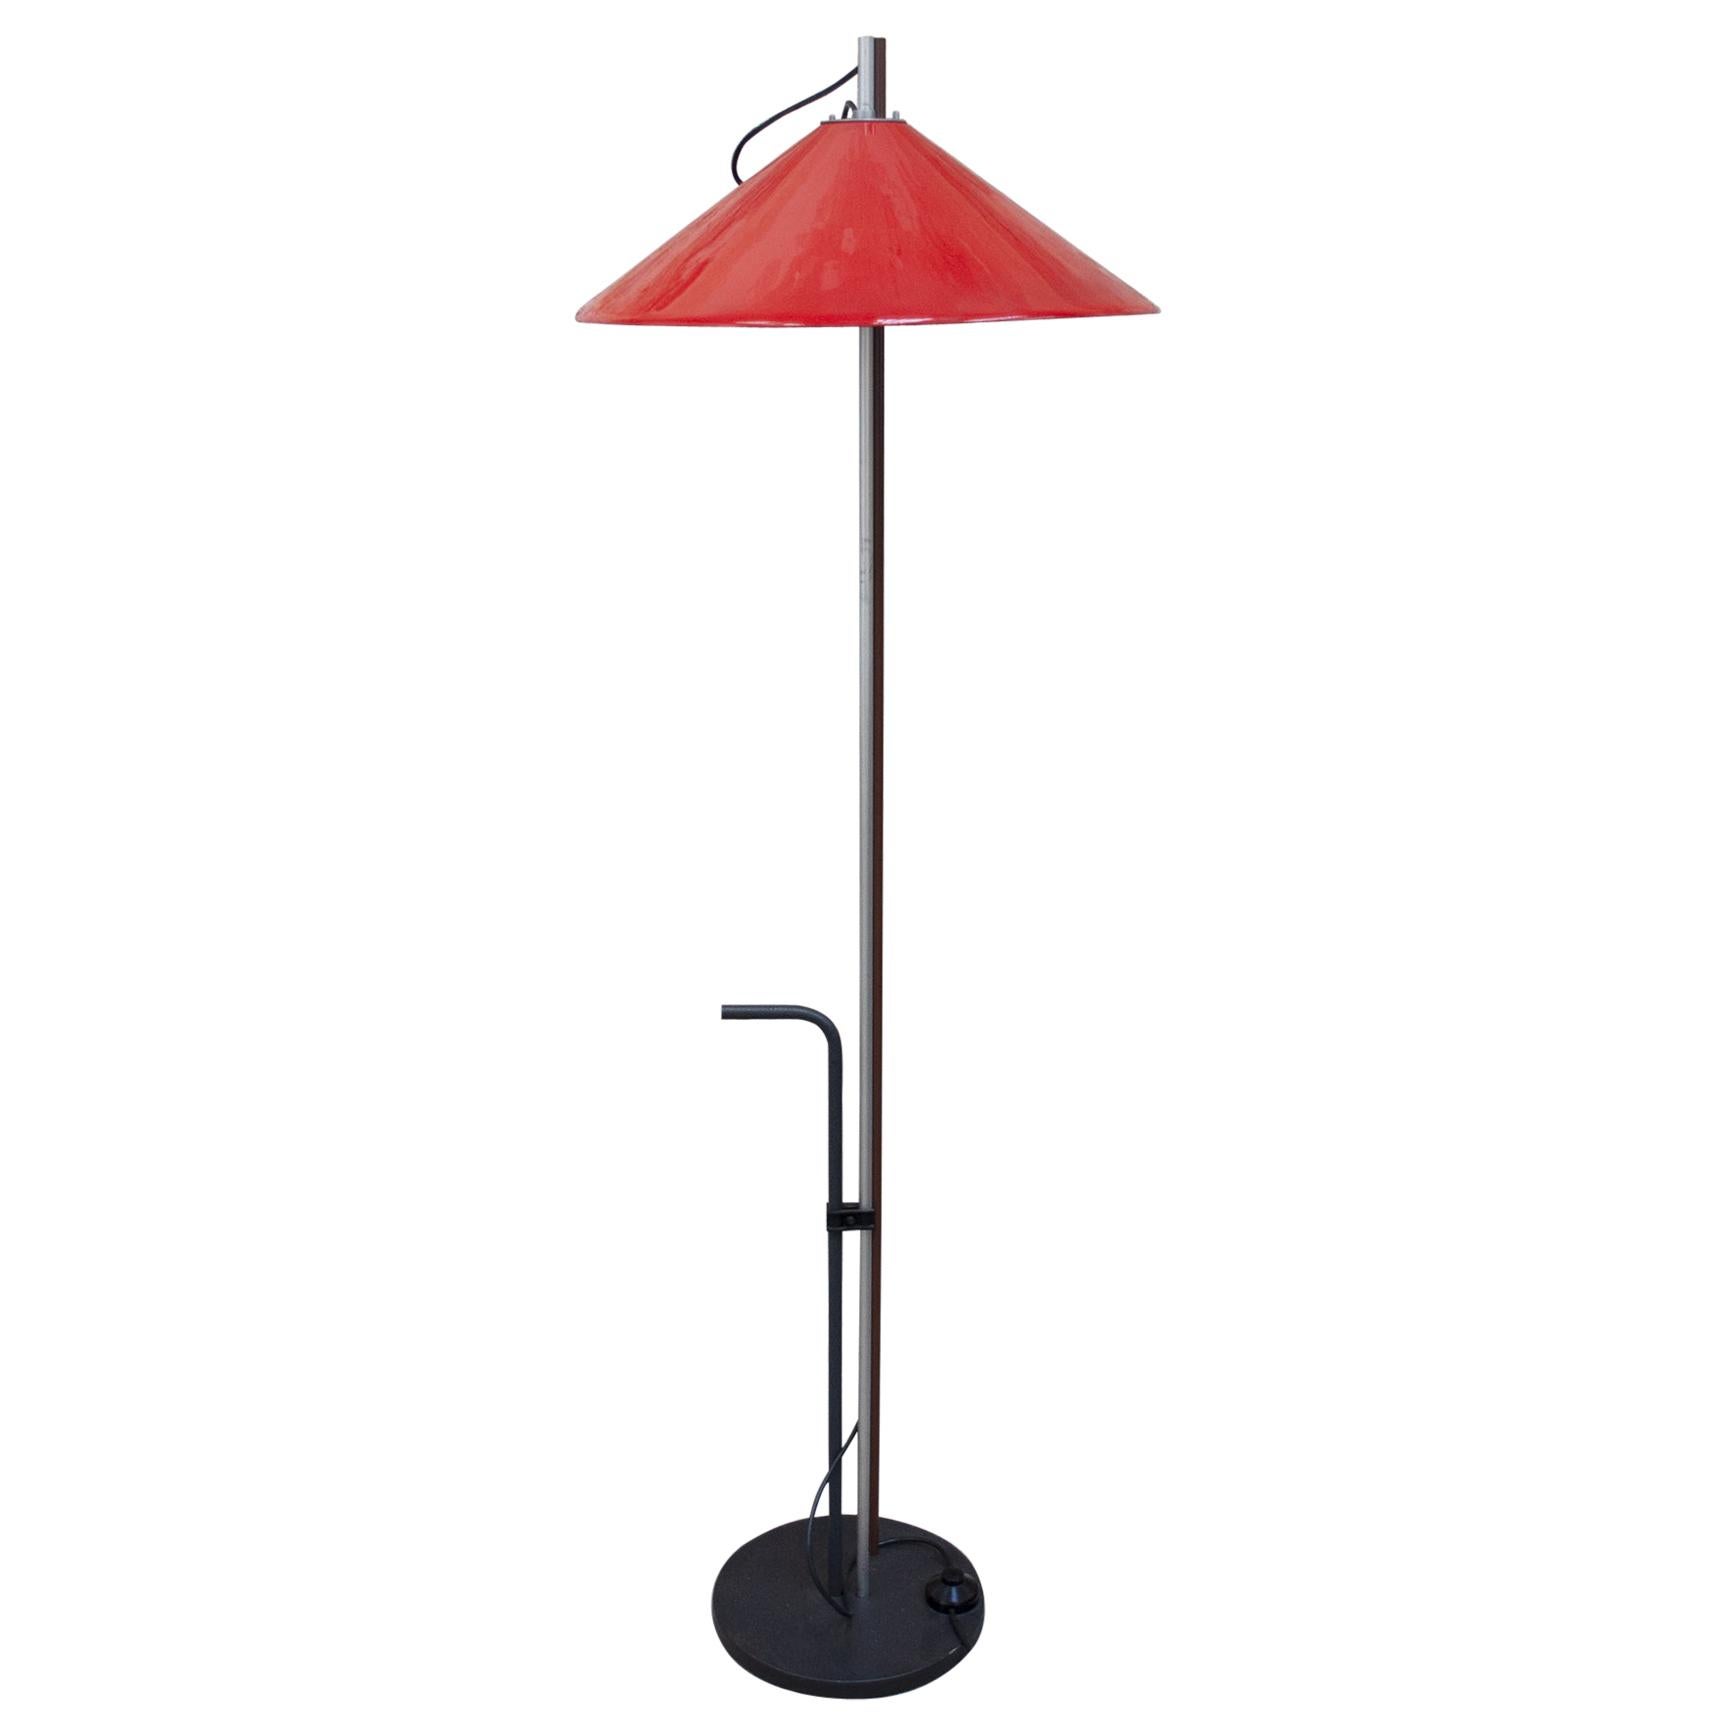 Aggregato Floor Lamp by Enzo Mari and Giancarlo Fassina for Artemide, 1970 For Sale